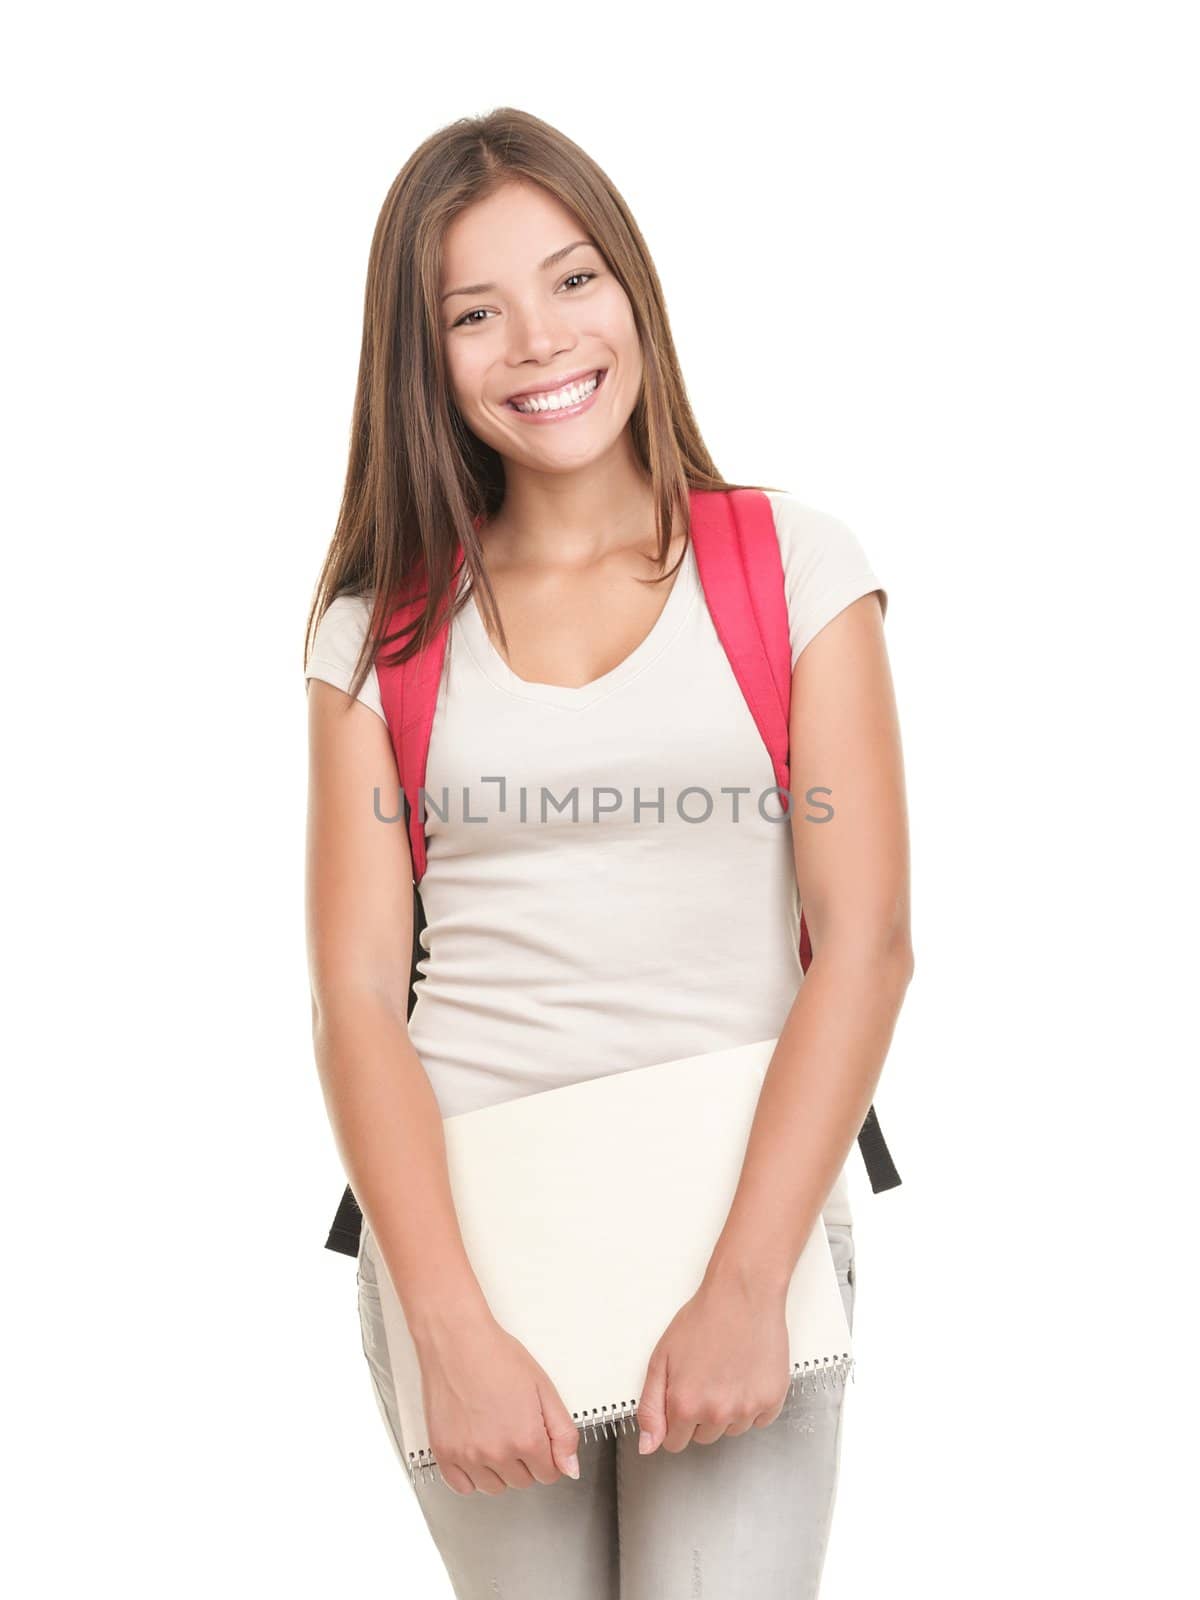 Student. Female college university student isolated on white background. Smiling friendly to the camera, wearing a red school bag and holding note books. 